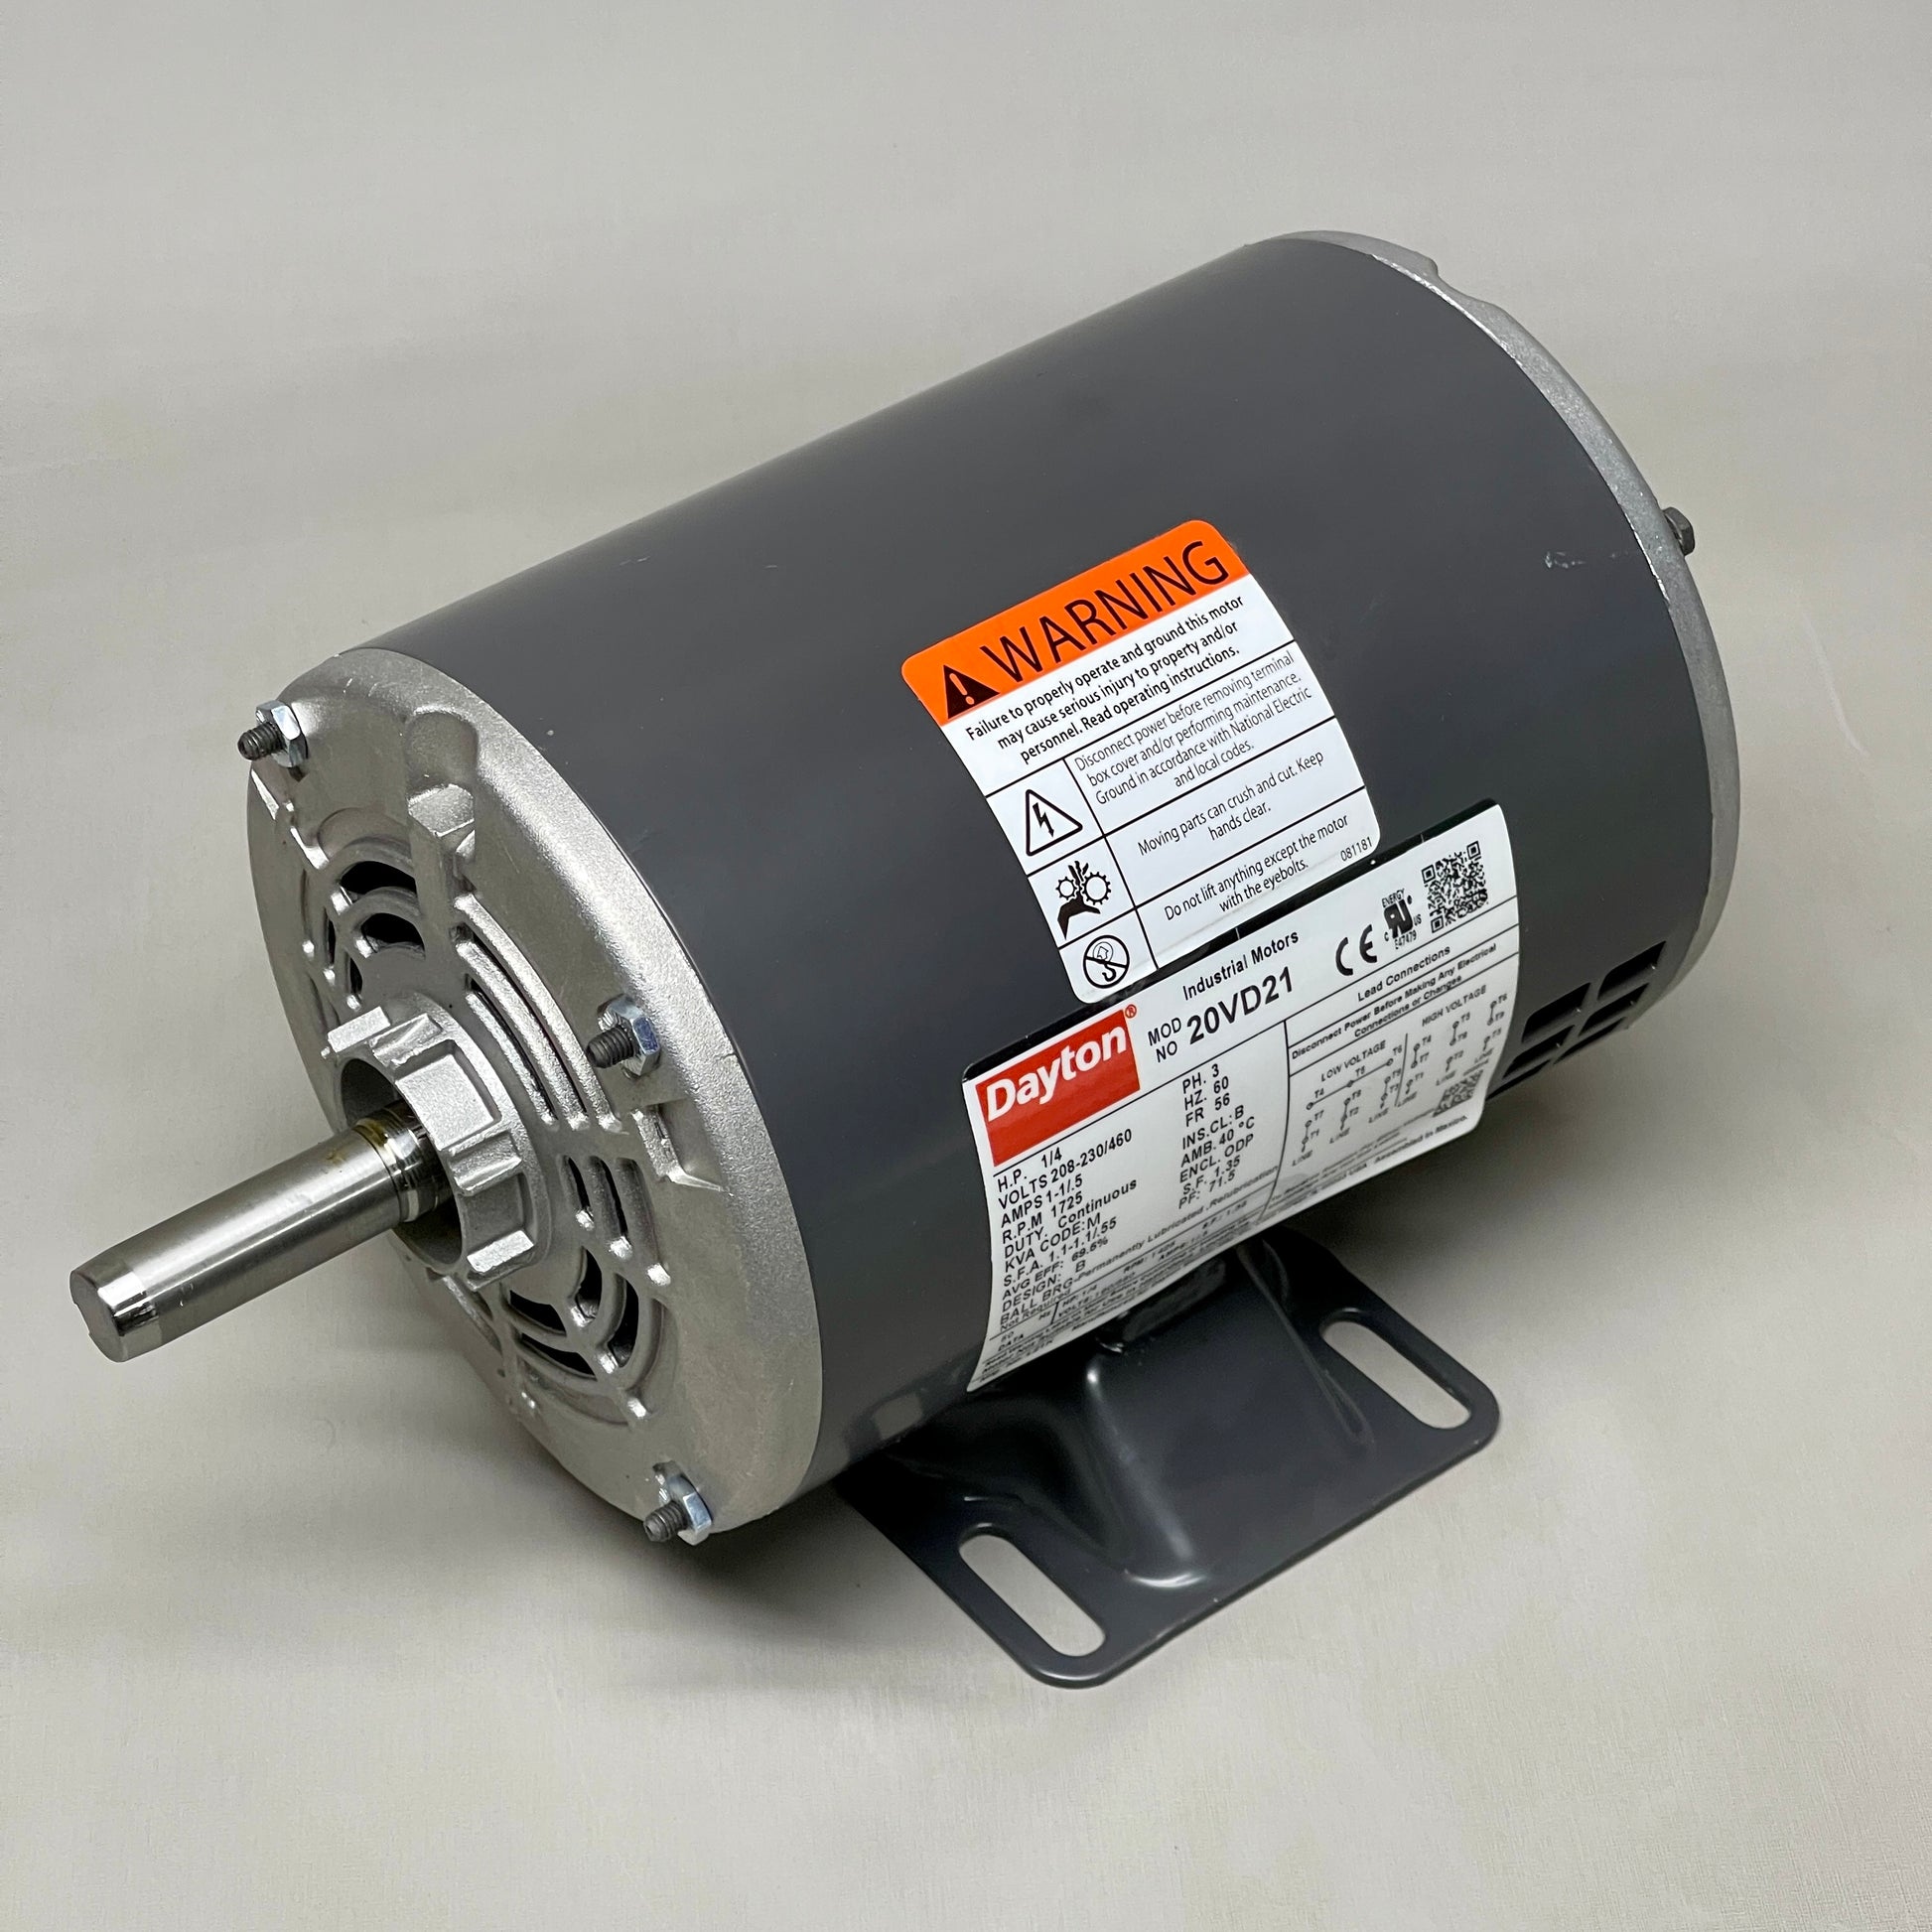 NIDEC Drive Systems DC Reel Motor 1/2 HP 650RPM 115V 6.5A P56SX205 (New)